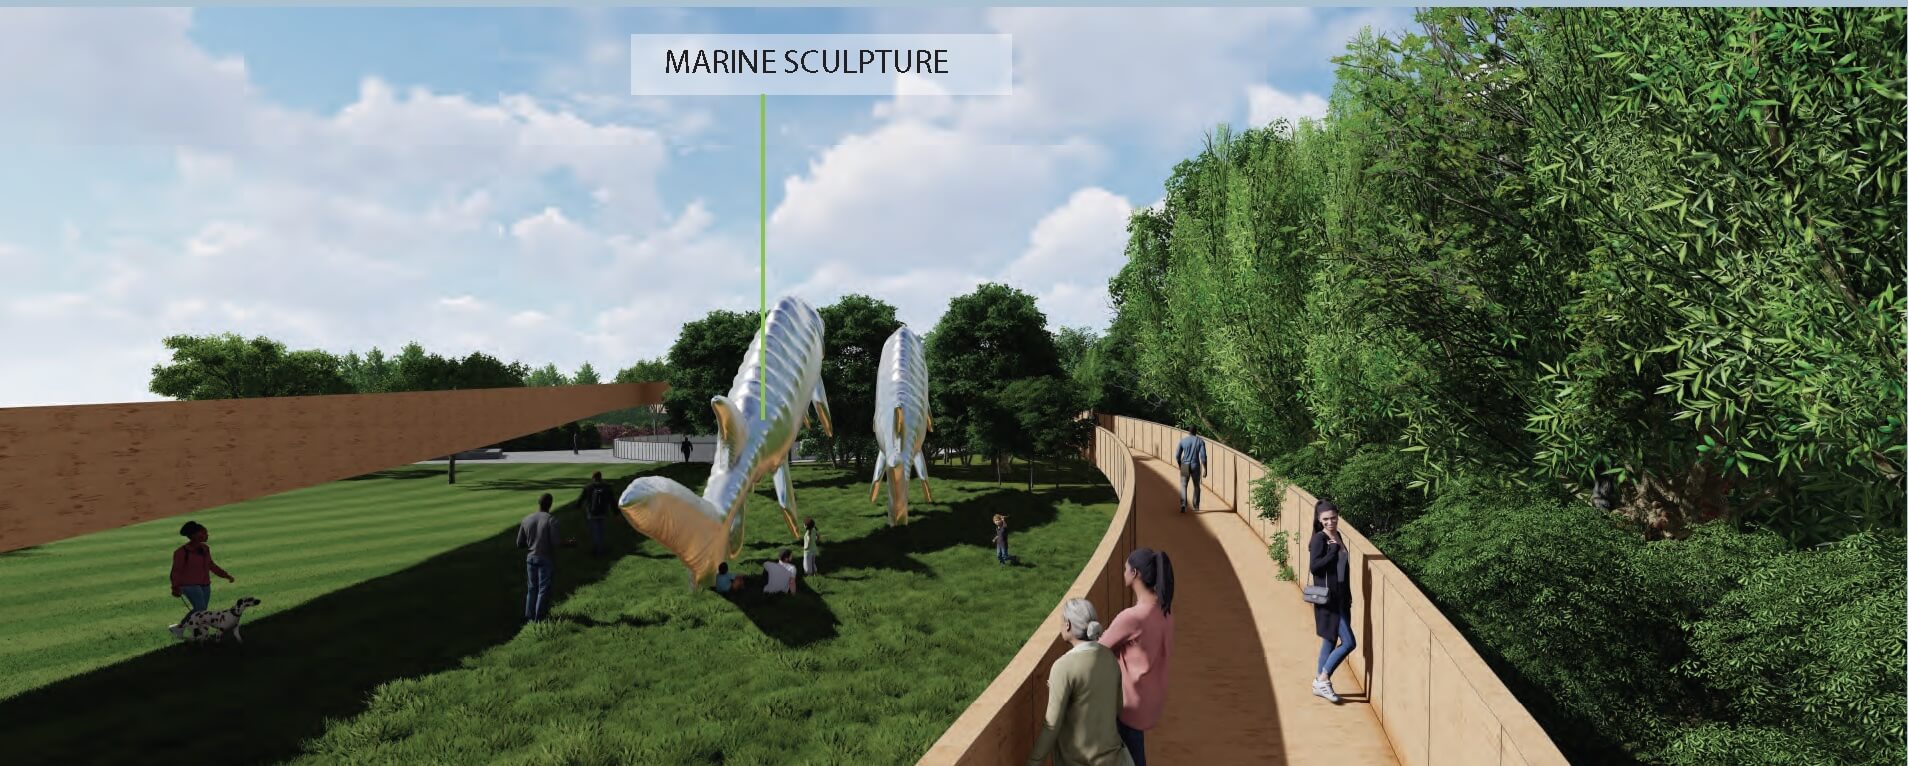 rendering of a park space with a large fish sculpture